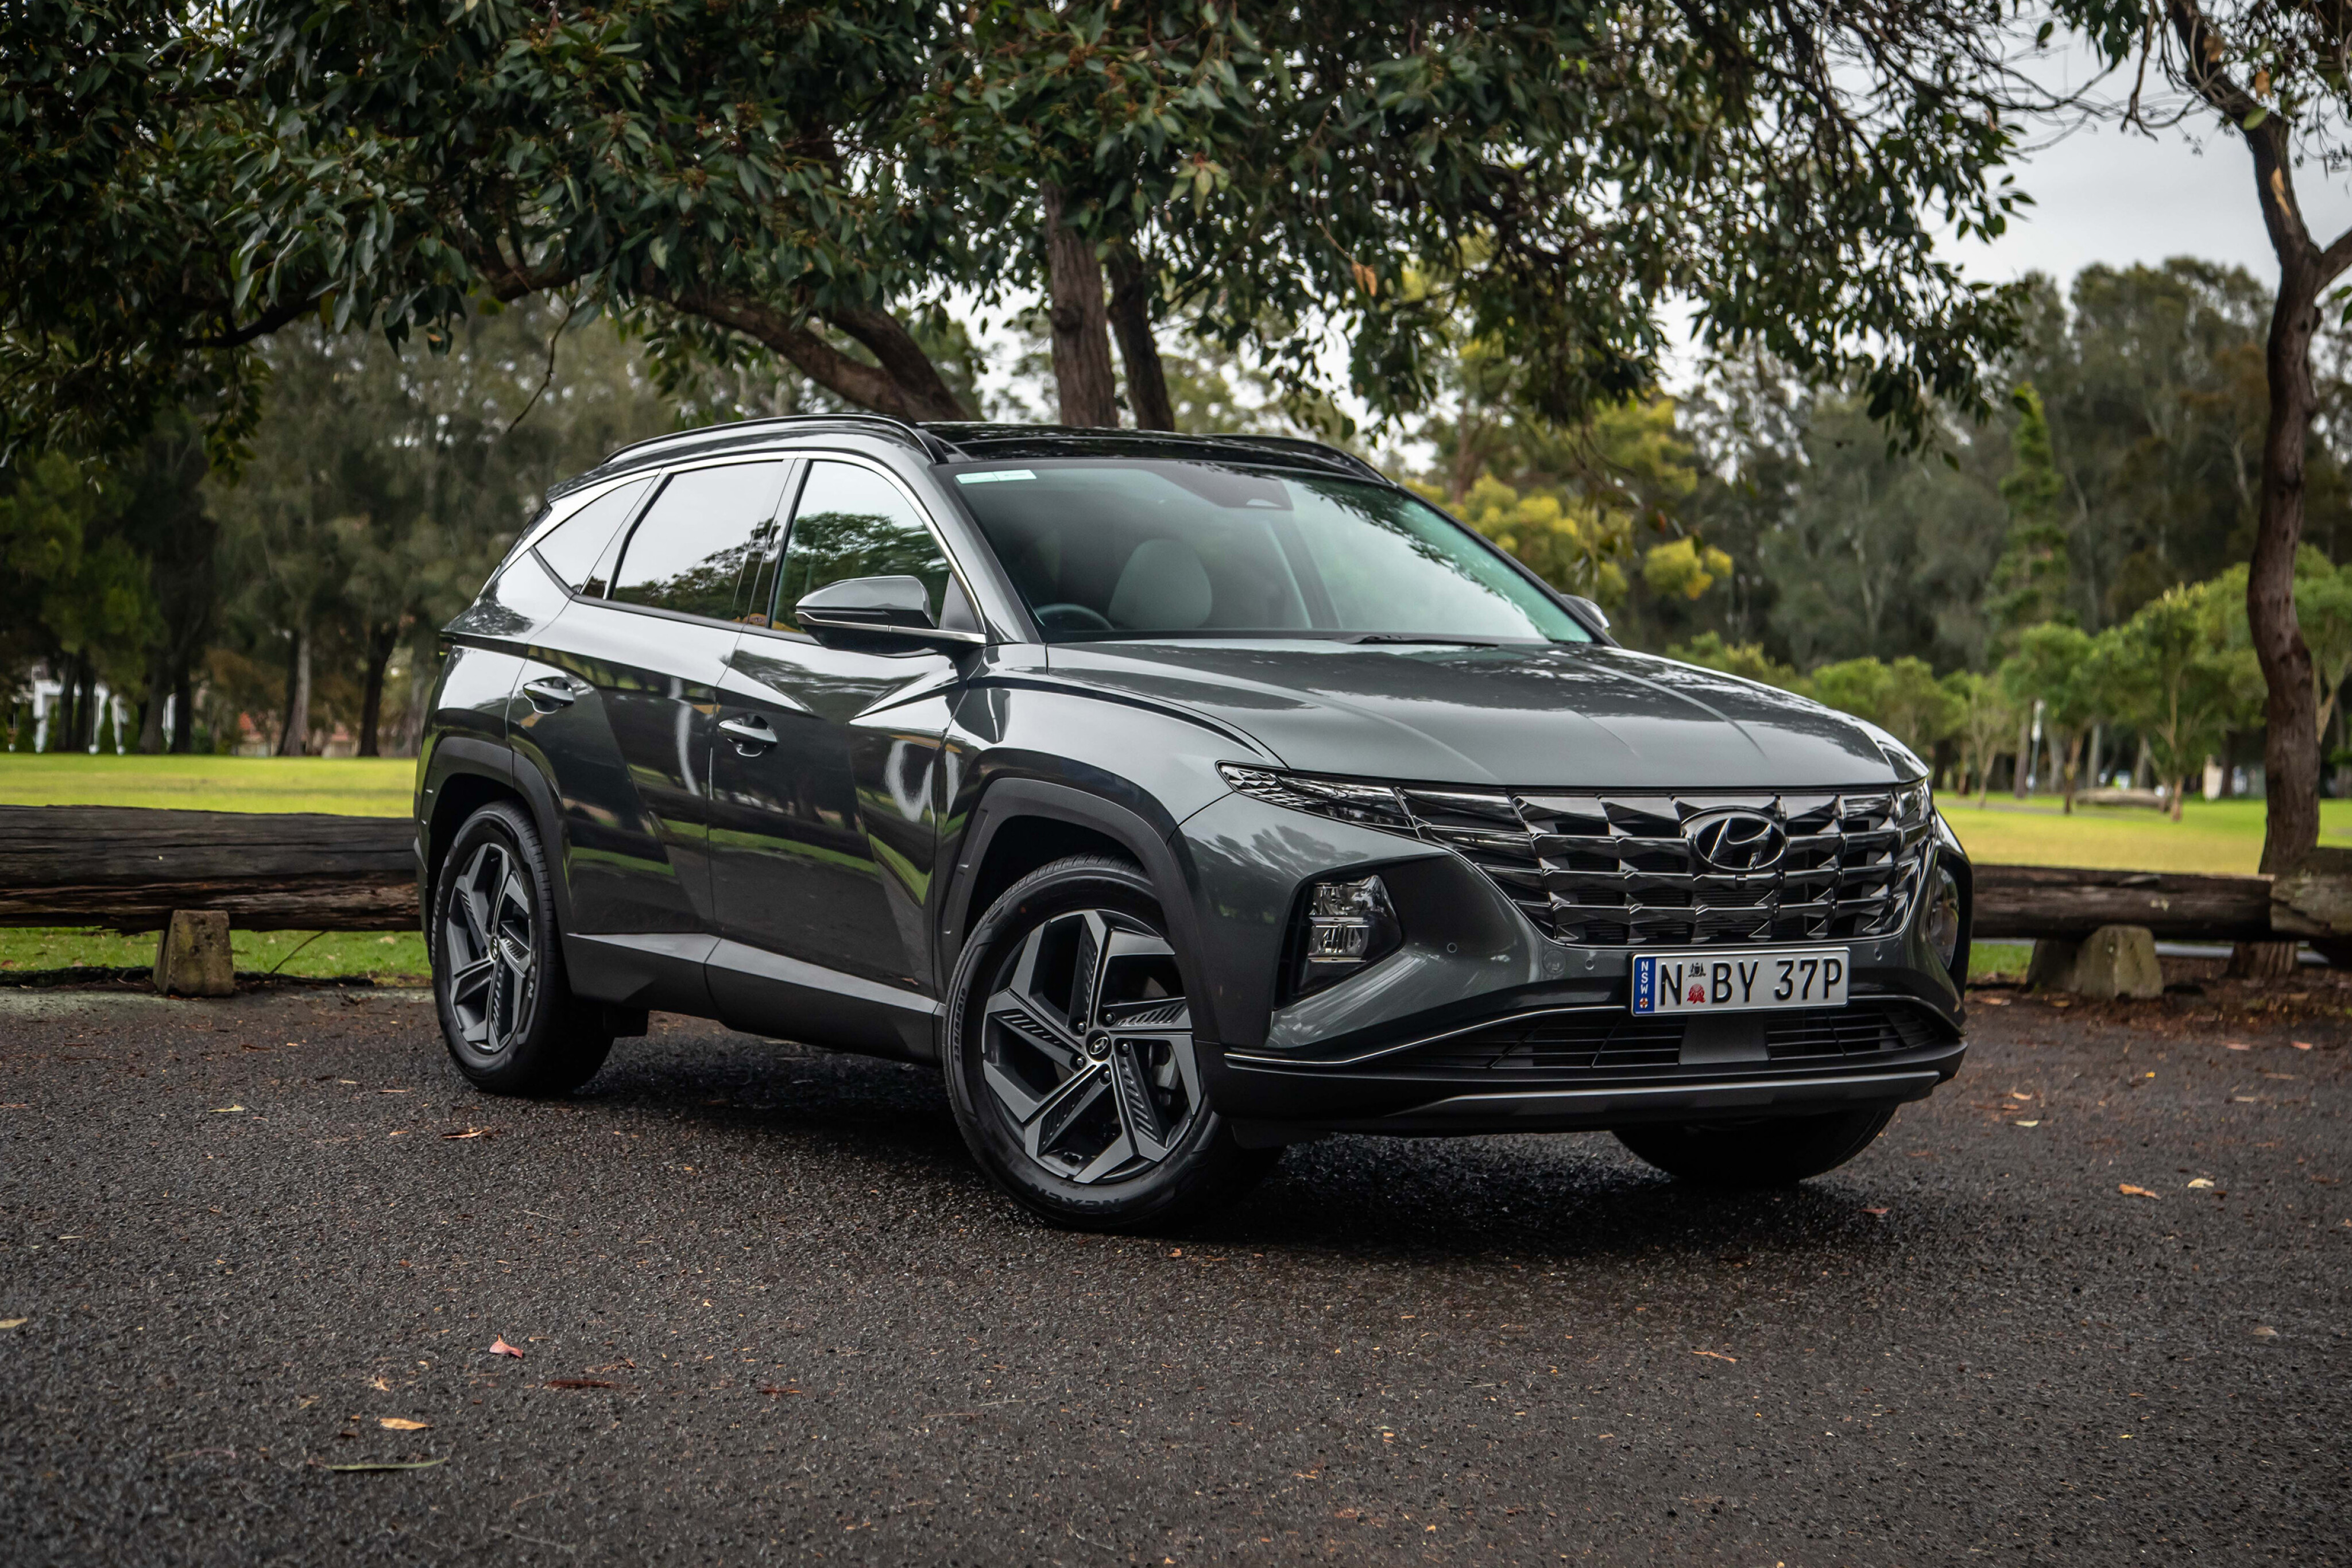 Sunroof-less 2023 Hyundai Tucson opened to new buyers with reduced